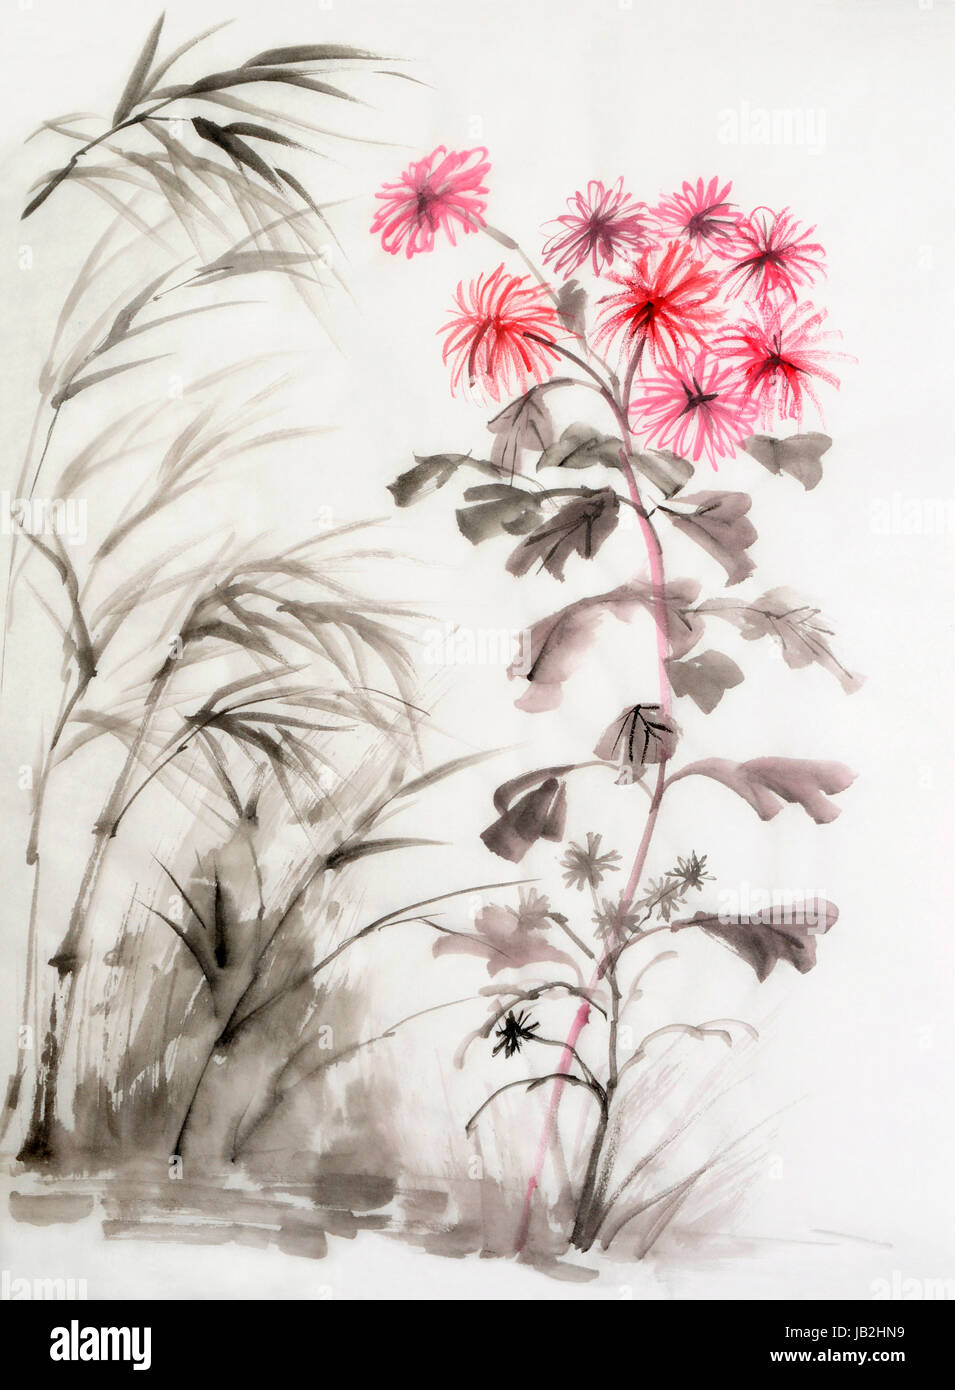 Watercolor painting of Chrysanthemum flower and bamboo. Asian style. Stock Photo